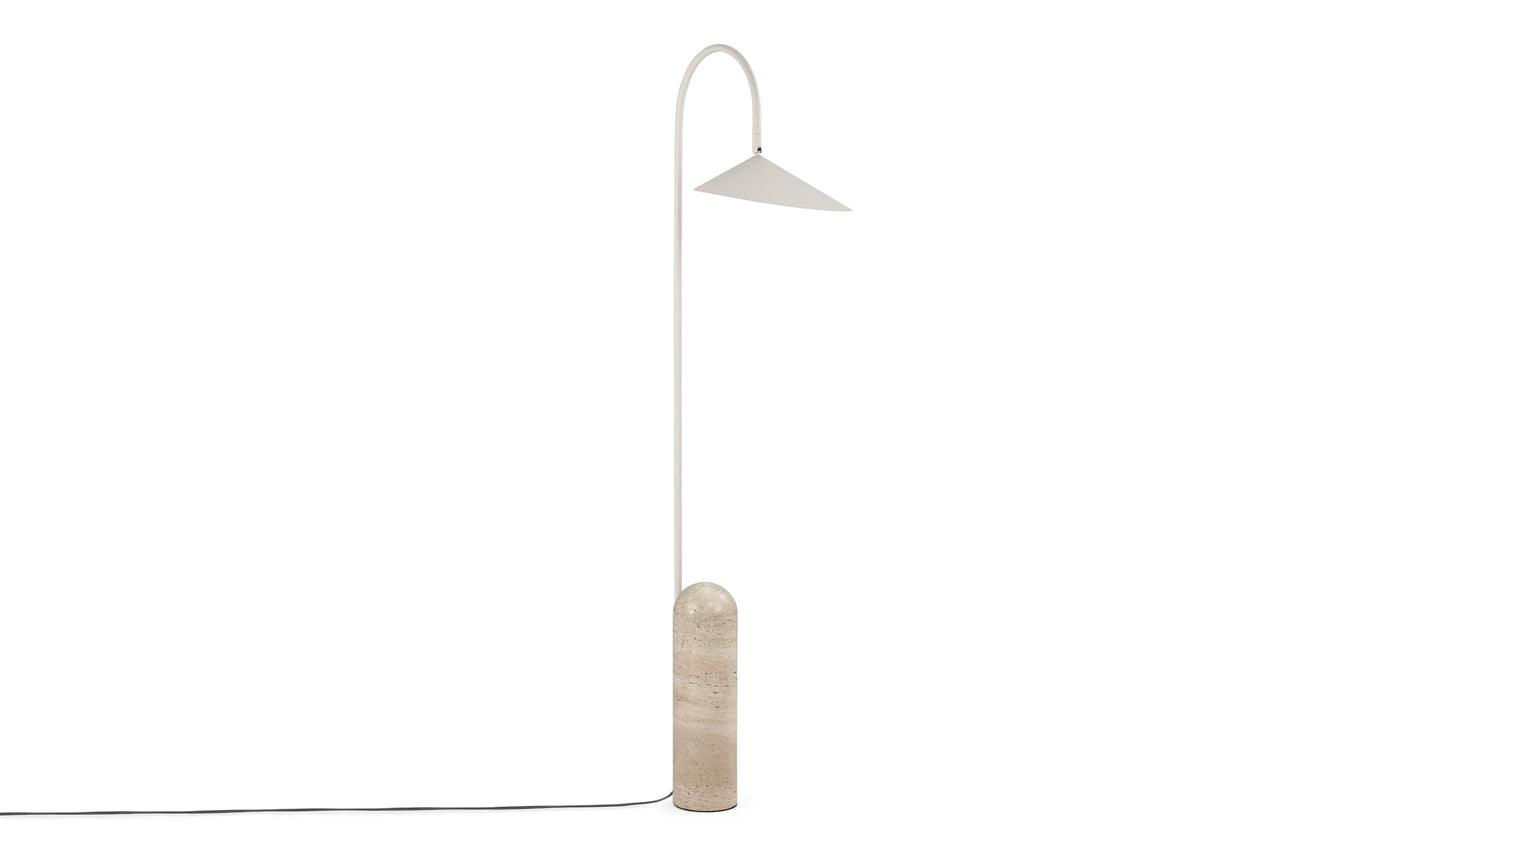 Elegant Illumination | Versatility is a key feature of the Audo Floor Lamp. Whether placed in a living room, bedroom, or study, it enhances the ambiance with its warm, diffused light, creating a cozy atmosphere. The adjustable shade allows for customizable illumination, catering to different lighting preferences and needs.
